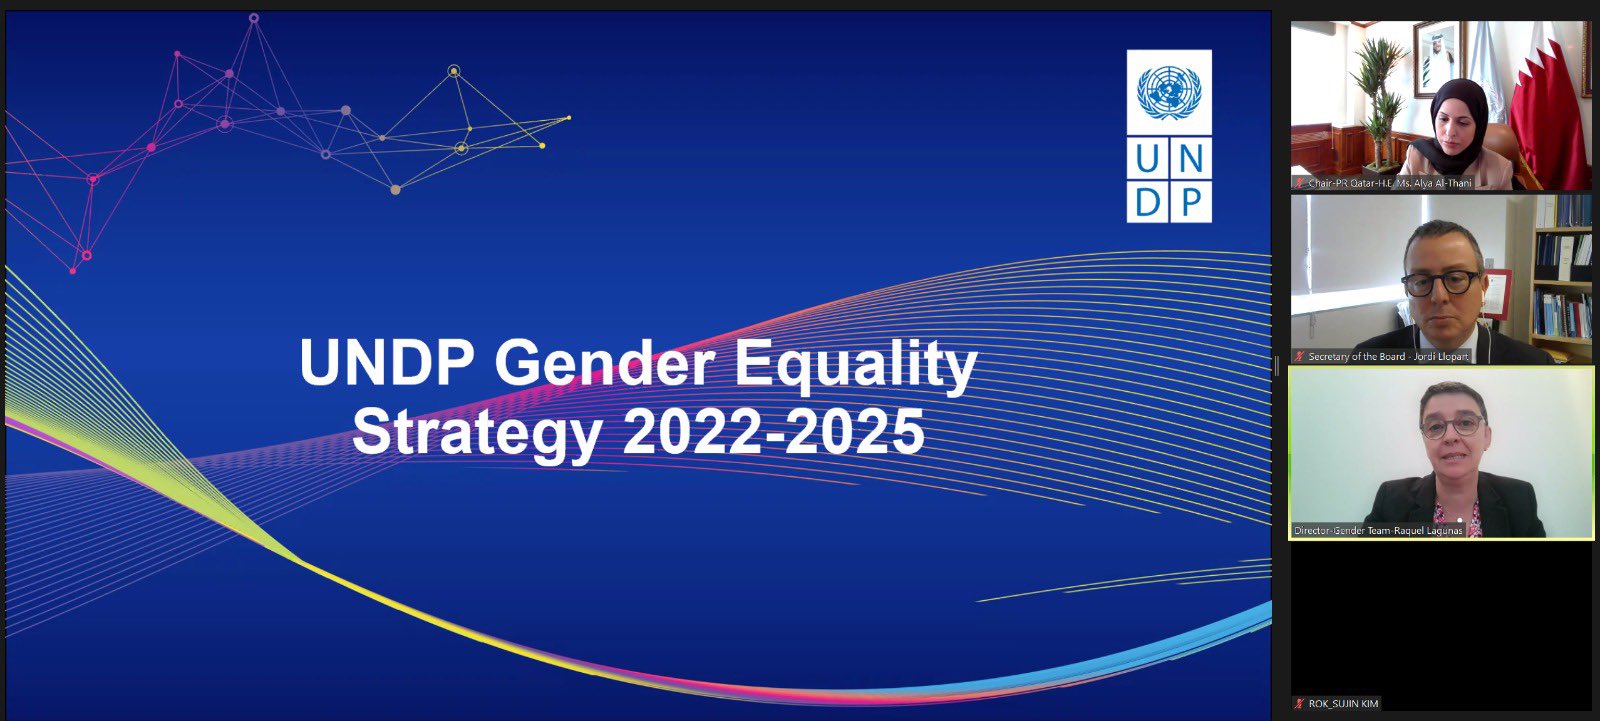 Ahmed Saif Al Thani on Twitter: "As Vice President of @UNDP, @UNFPA &amp; @UNOPS Executive Board, today I chaired the informal consultation on Gender Equality Strategy 2022-2025. #Qatar @QatarAtUN🇶🇦 @UN🇺🇳 https://t.co/Z8BmgsIu8K" /